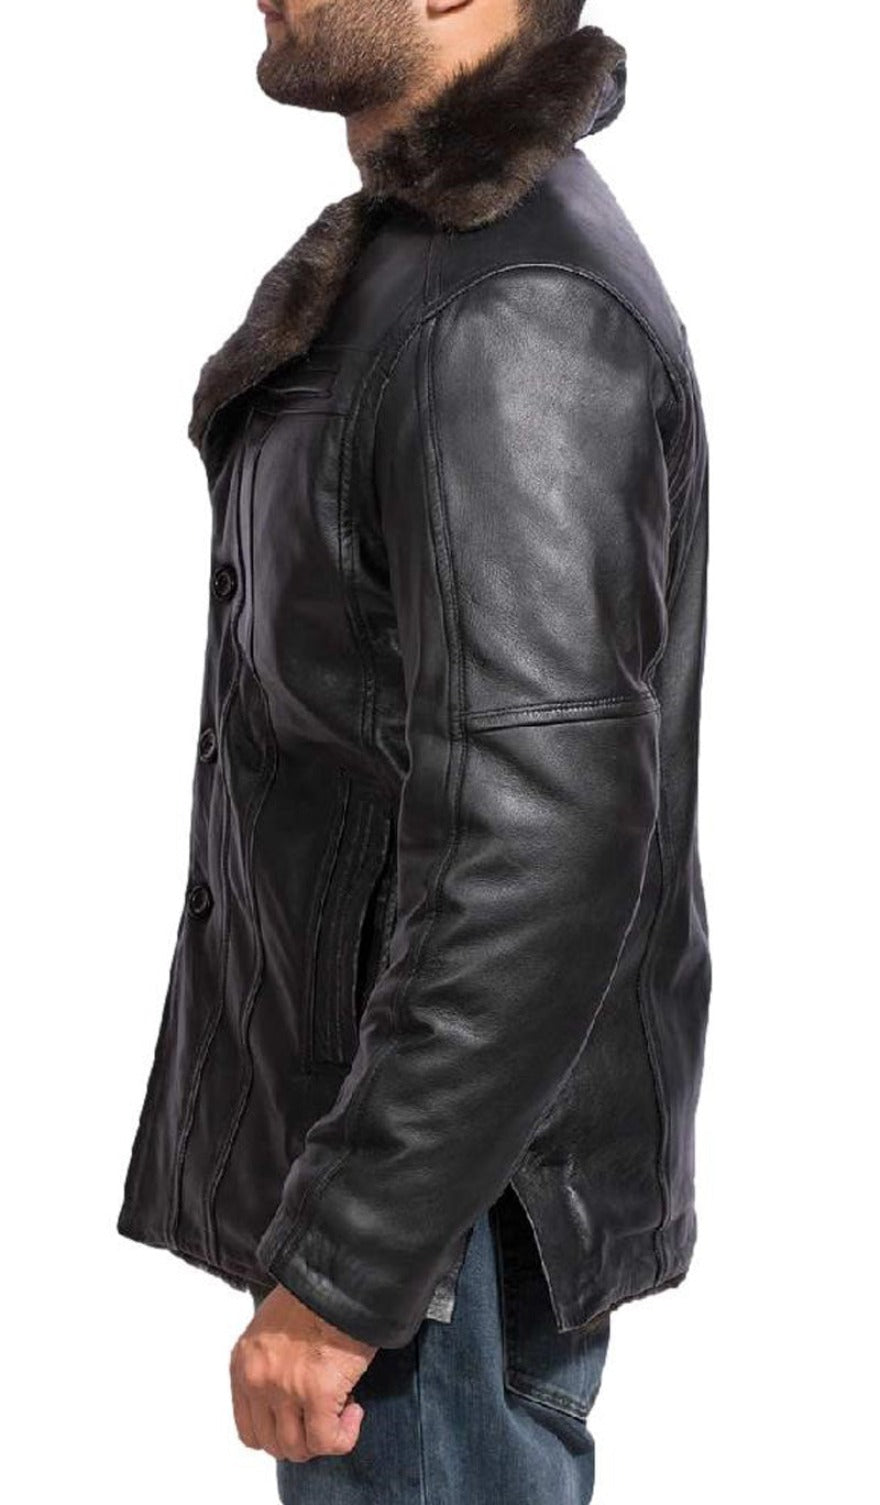 Model wearing a black shearling leather jacket, sidet view.